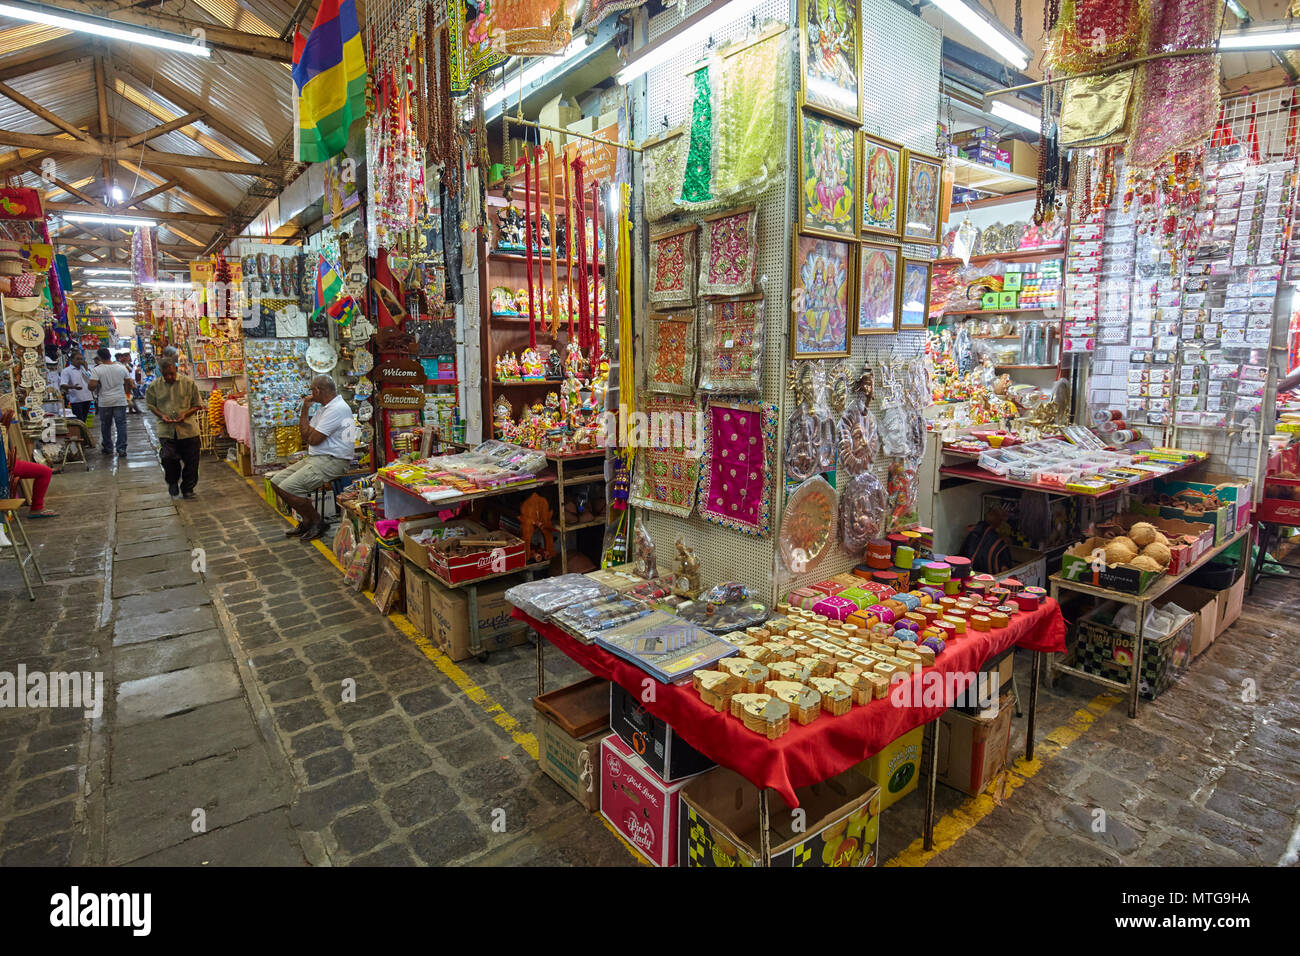 The Central Market (Bazaar) in Port Louis, Mauritius Stock Photo